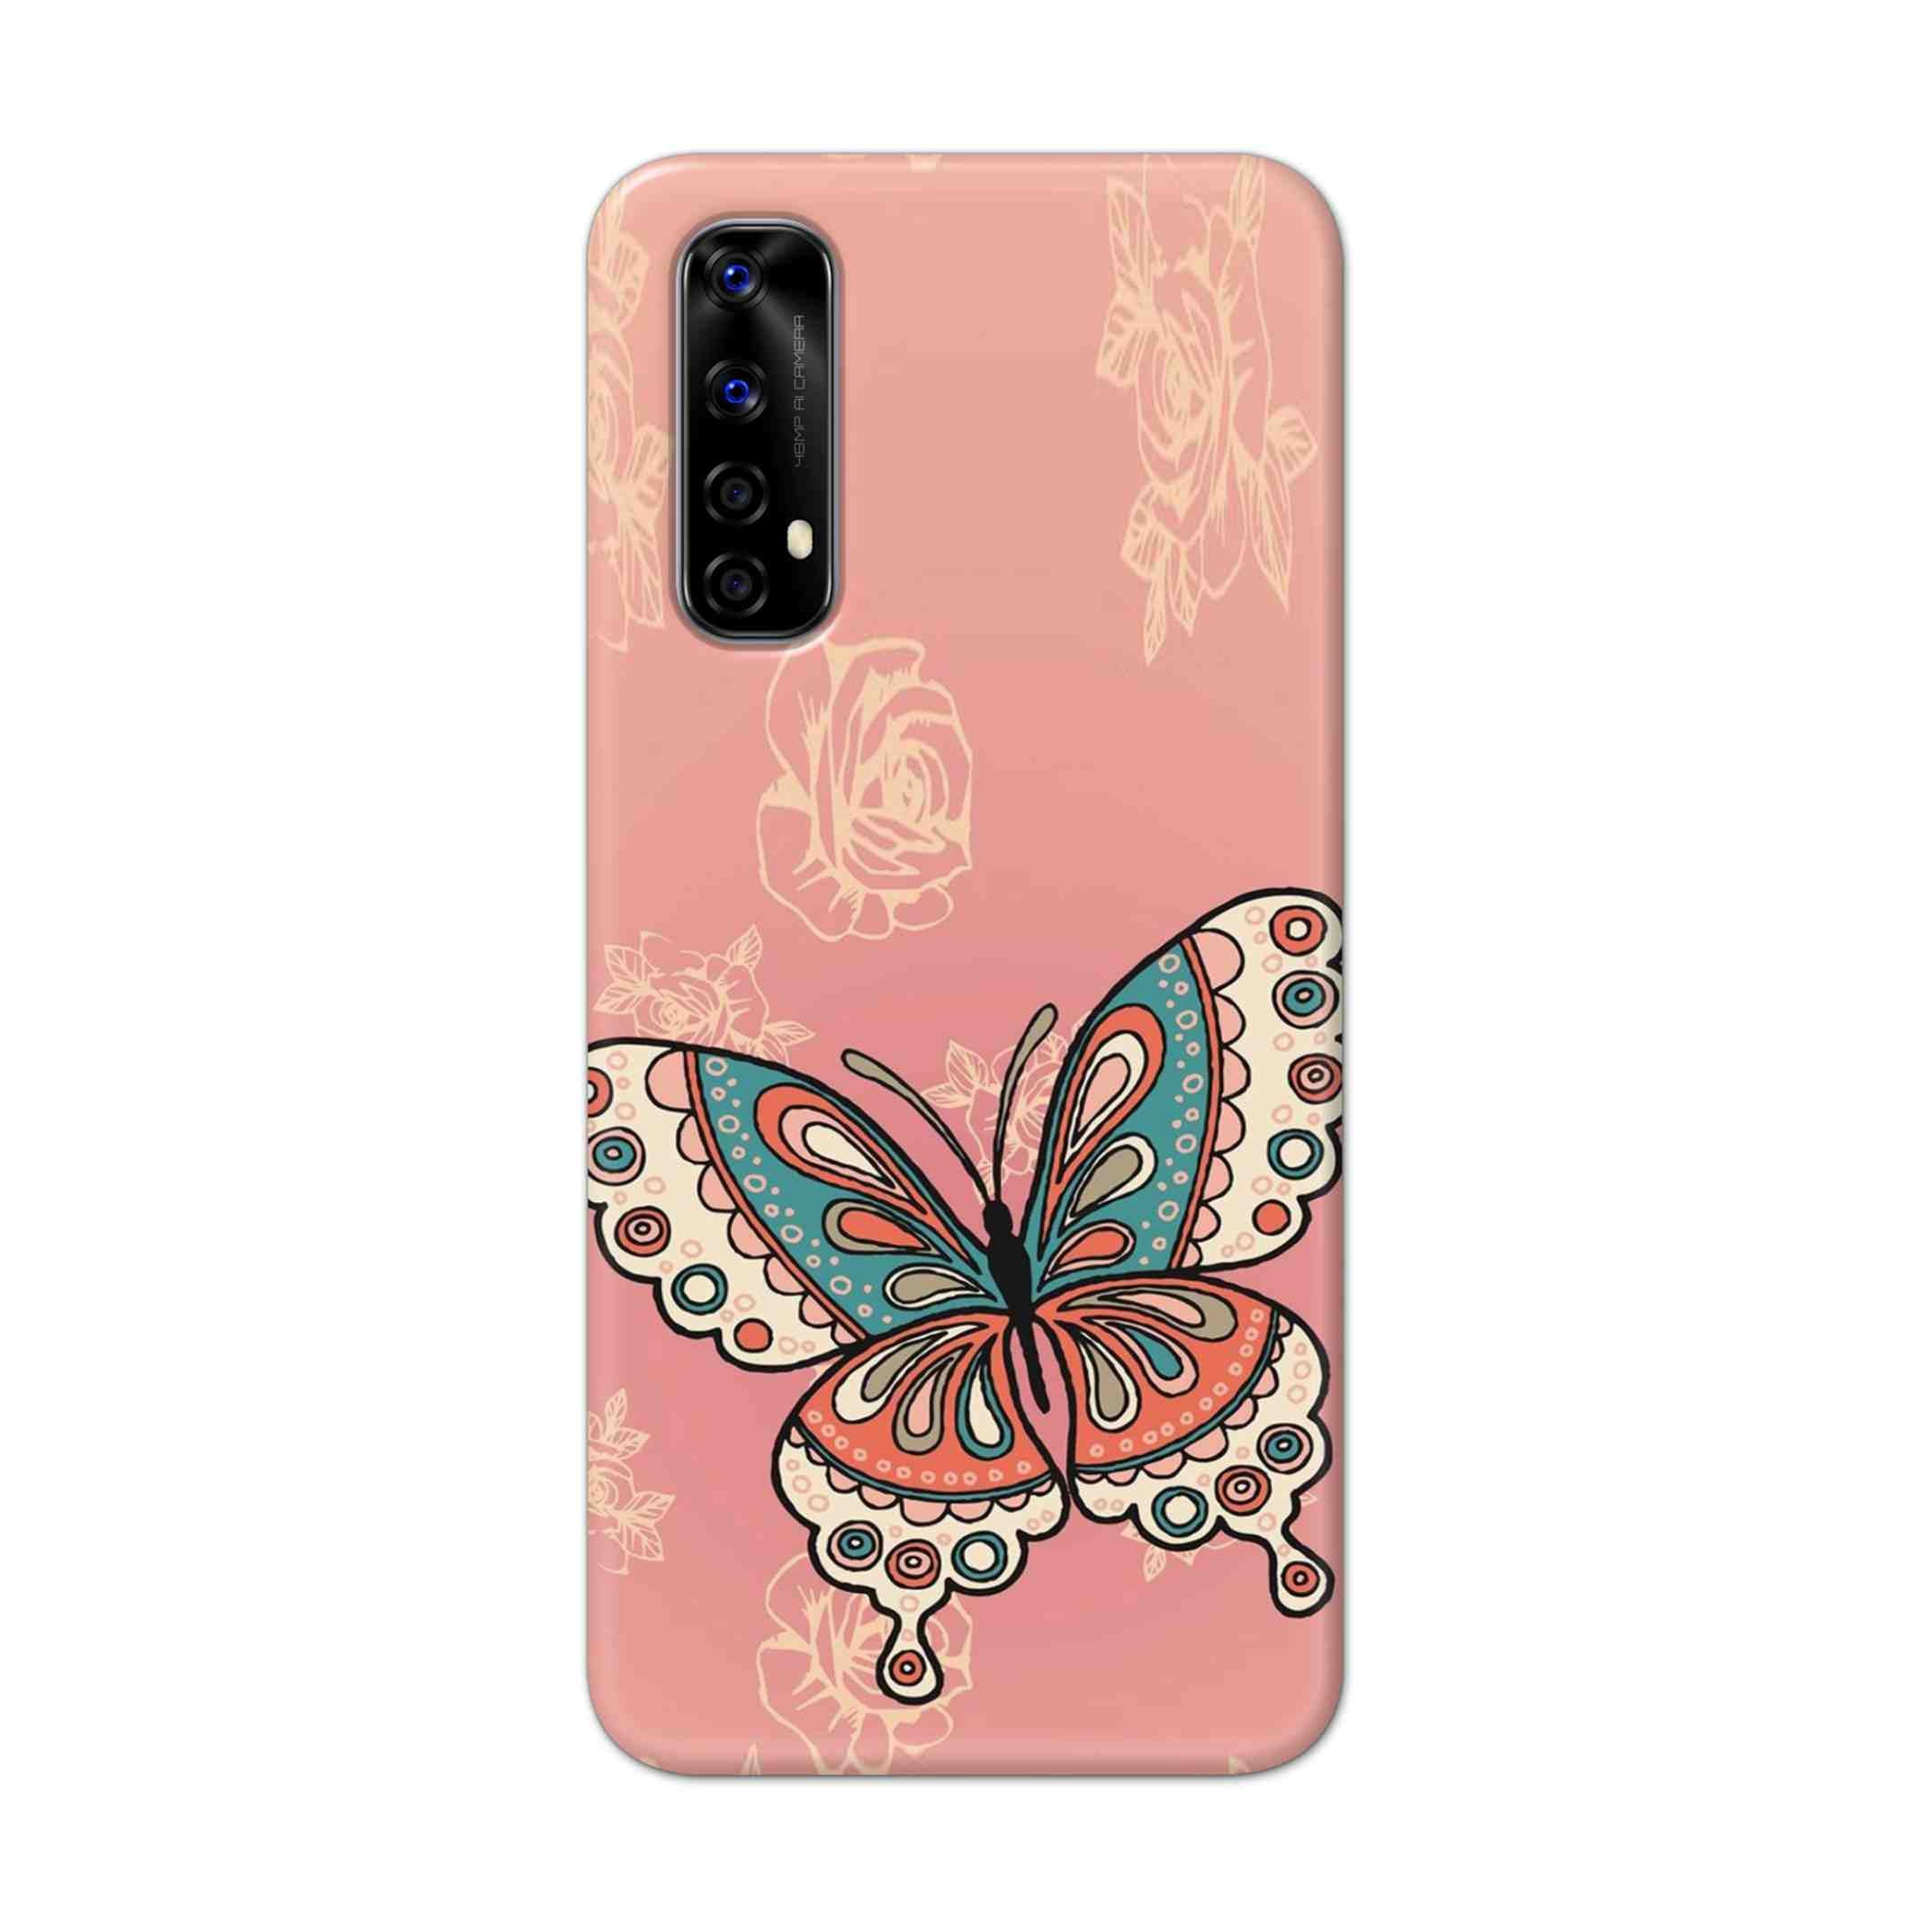 Buy Butterfly Hard Back Mobile Phone Case Cover For Realme Narzo 20 Pro Online